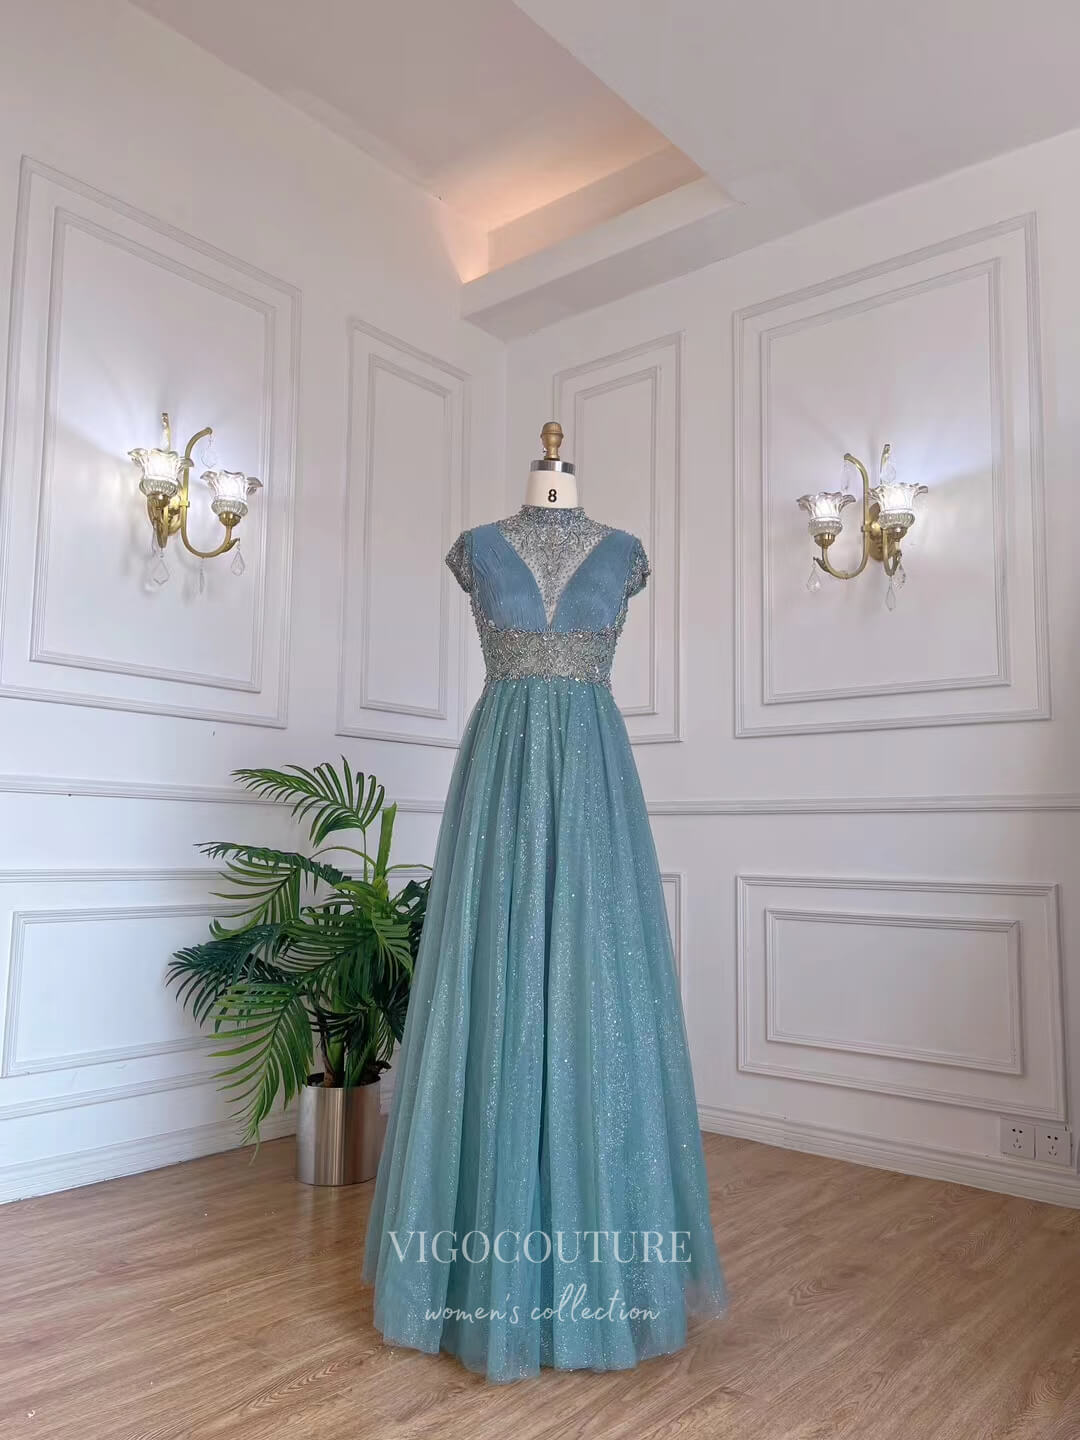 Dusty Blue Beaded High Neck Prom Dresses Cap Sleeve Mother of the Bride Dresses 22129-Prom Dresses-vigocouture-Dusty Blue-US2-vigocouture